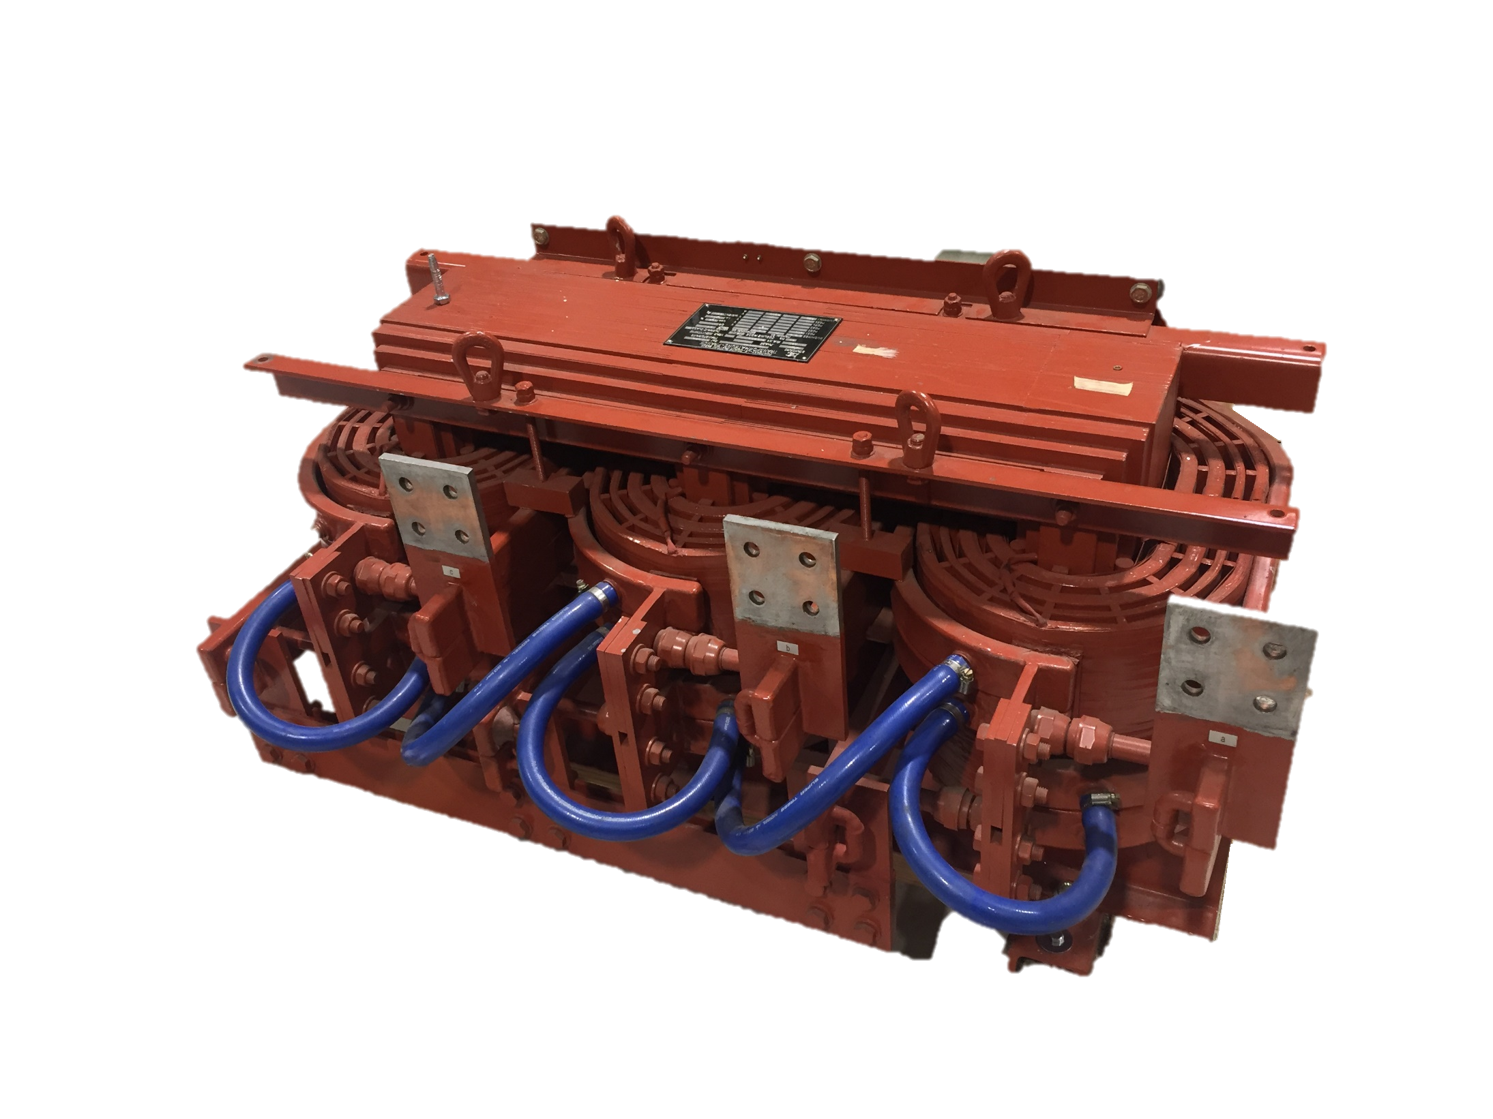 LV Large current water cooled transformers